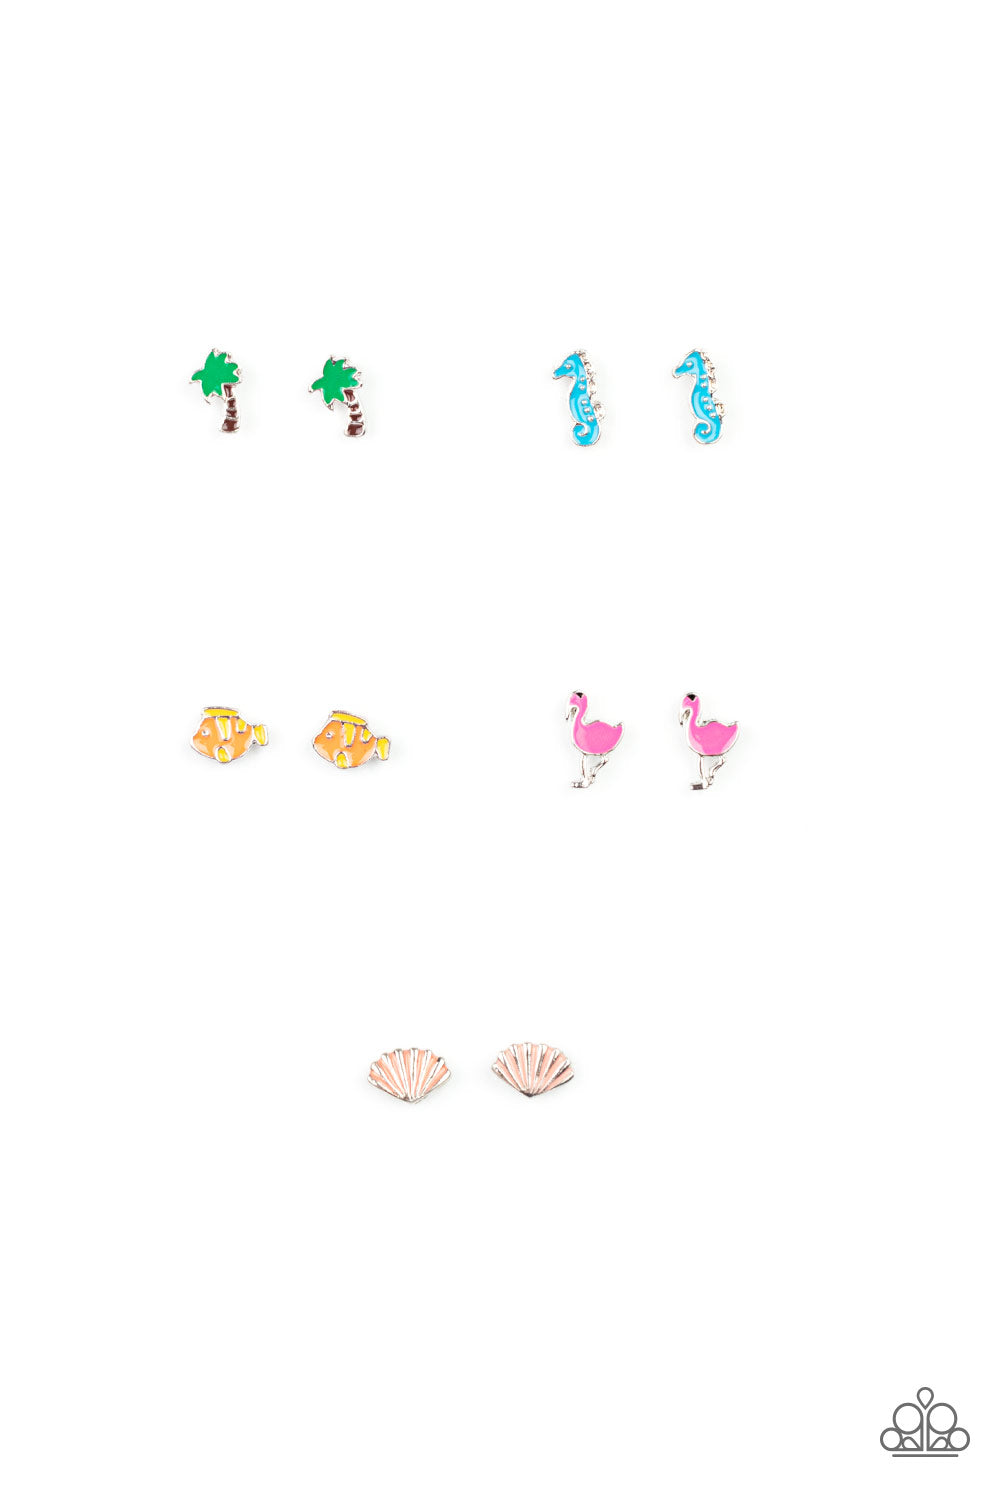 PRE-ORDER - Paparazzi Starlet Shimmer Earrings, 10 - Summer Inspired - Palm Trees, Seahorses, Fish, Flamingos and Seashells - $5 Jewelry with Ashley Swint